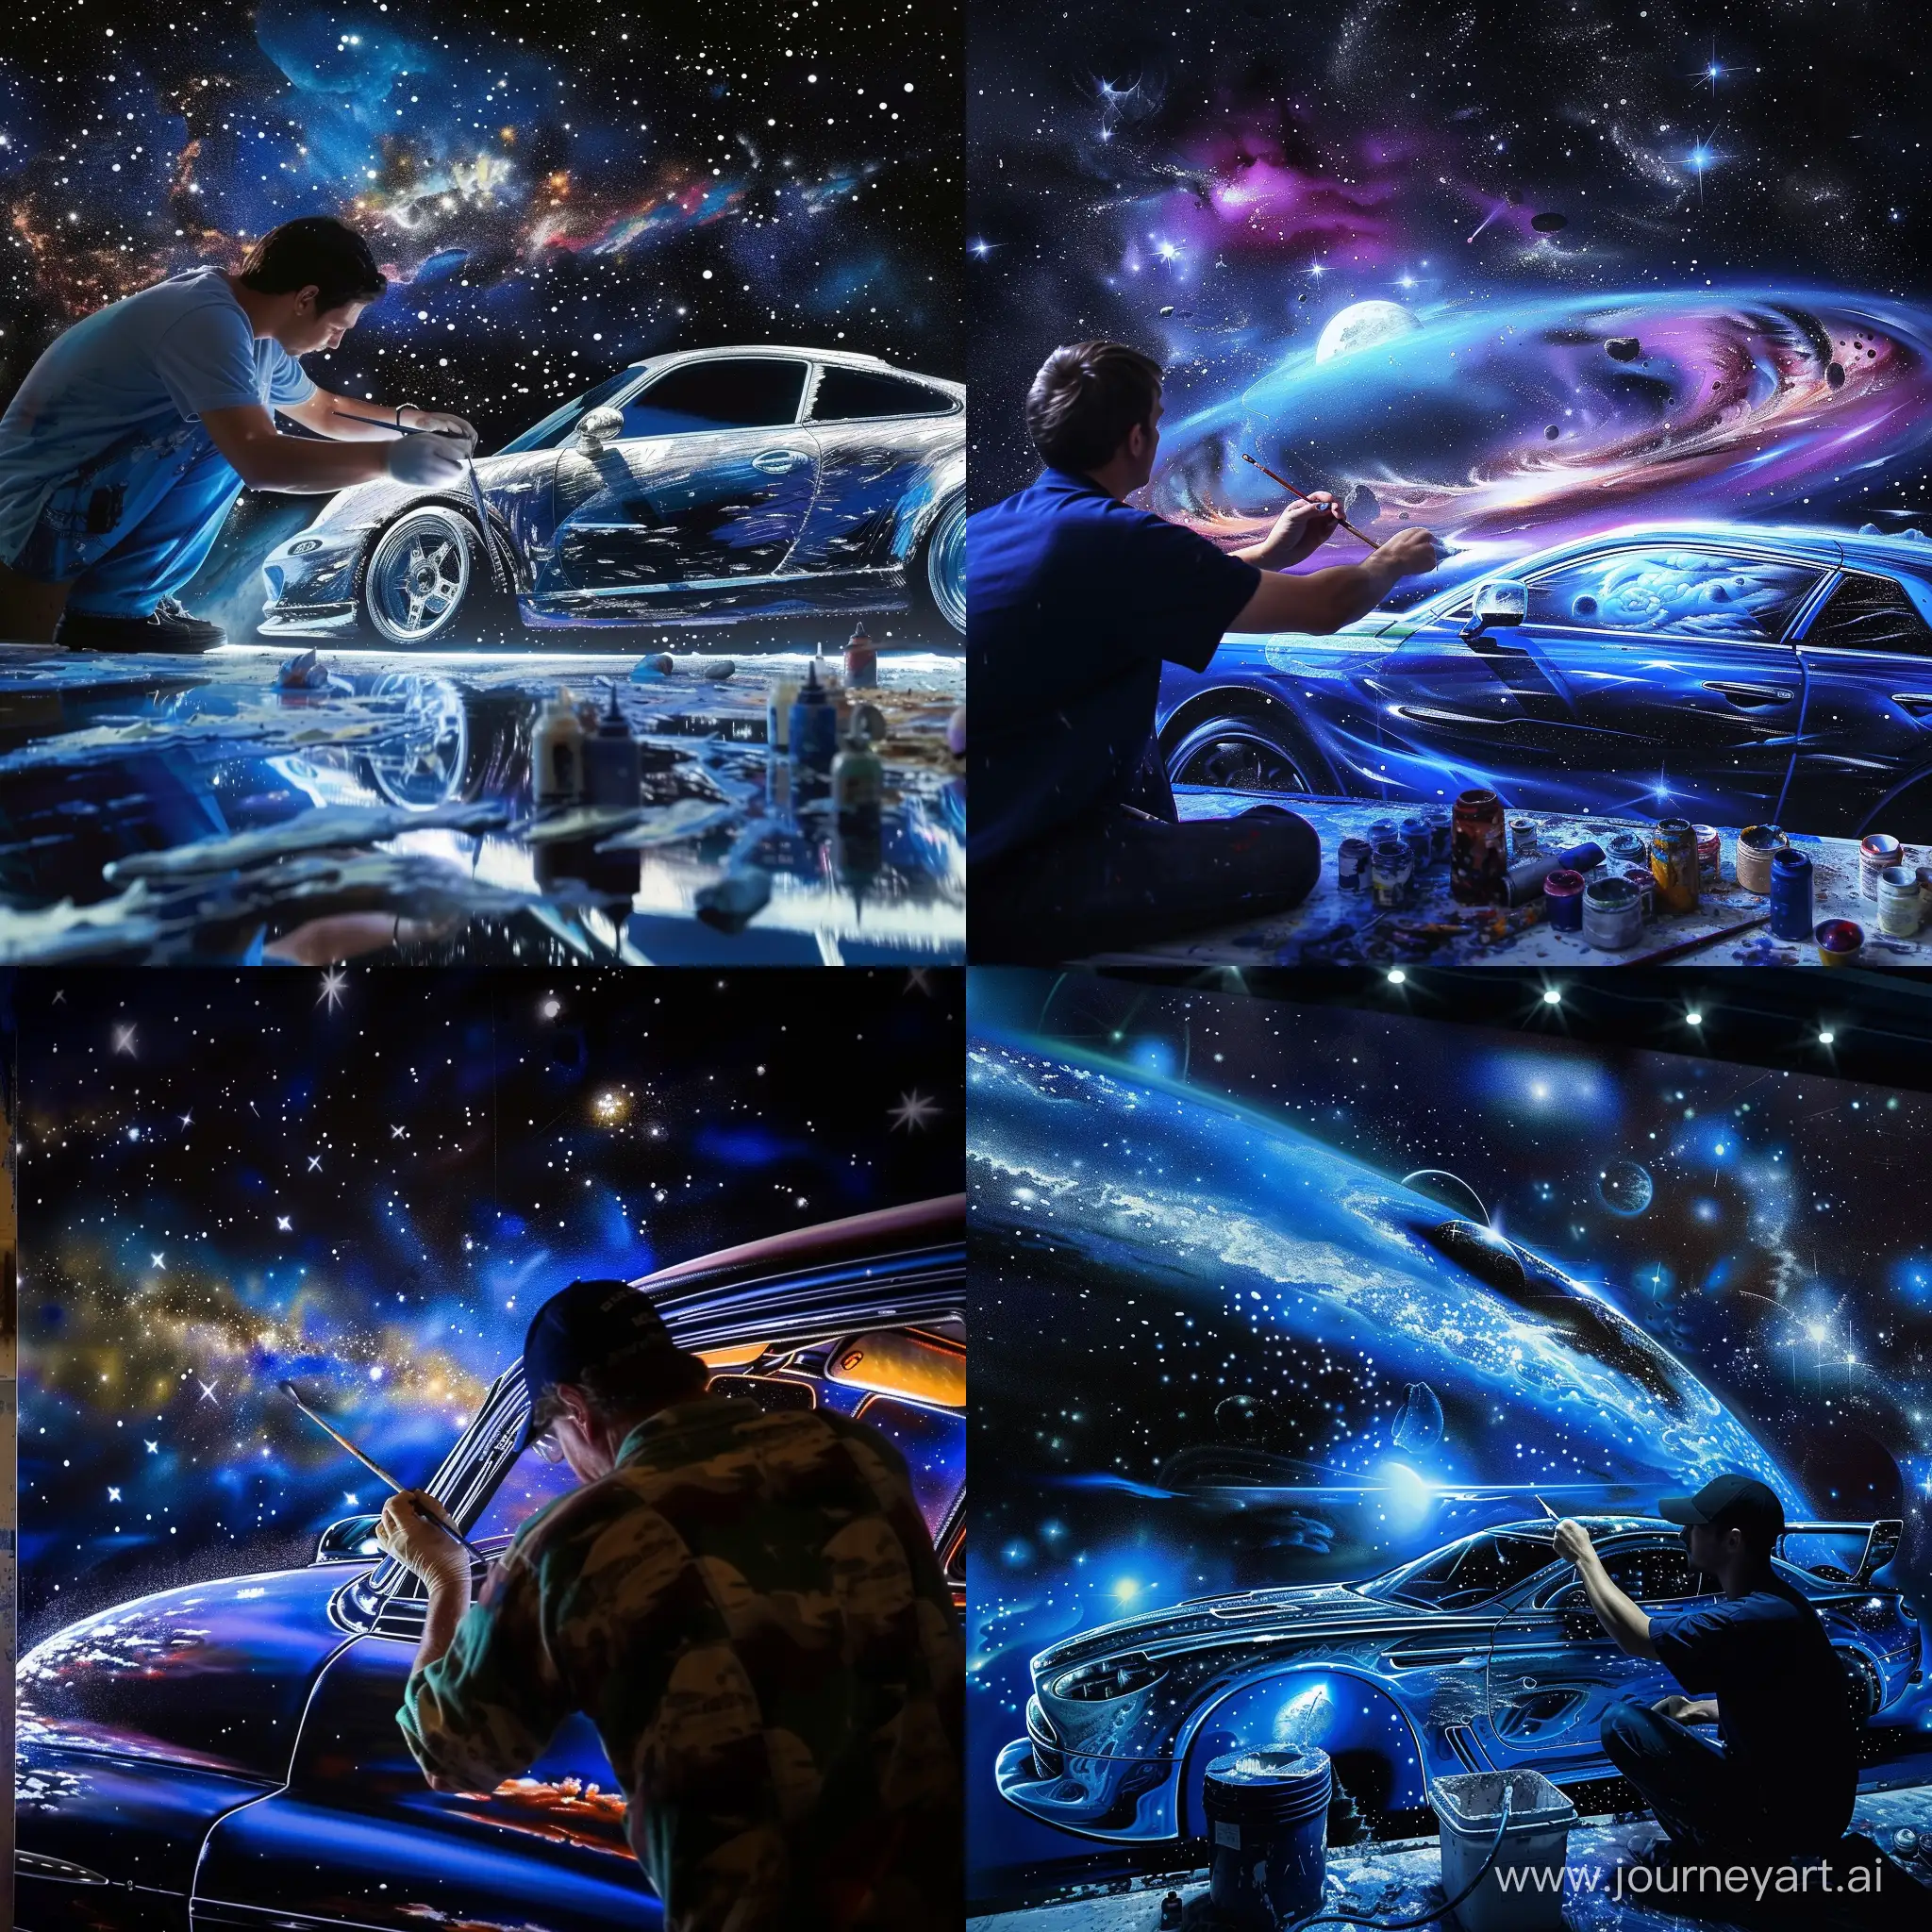 Cosmic-Car-Painting-Artist-Creates-Artistic-Masterpiece-in-the-Vastness-of-Space